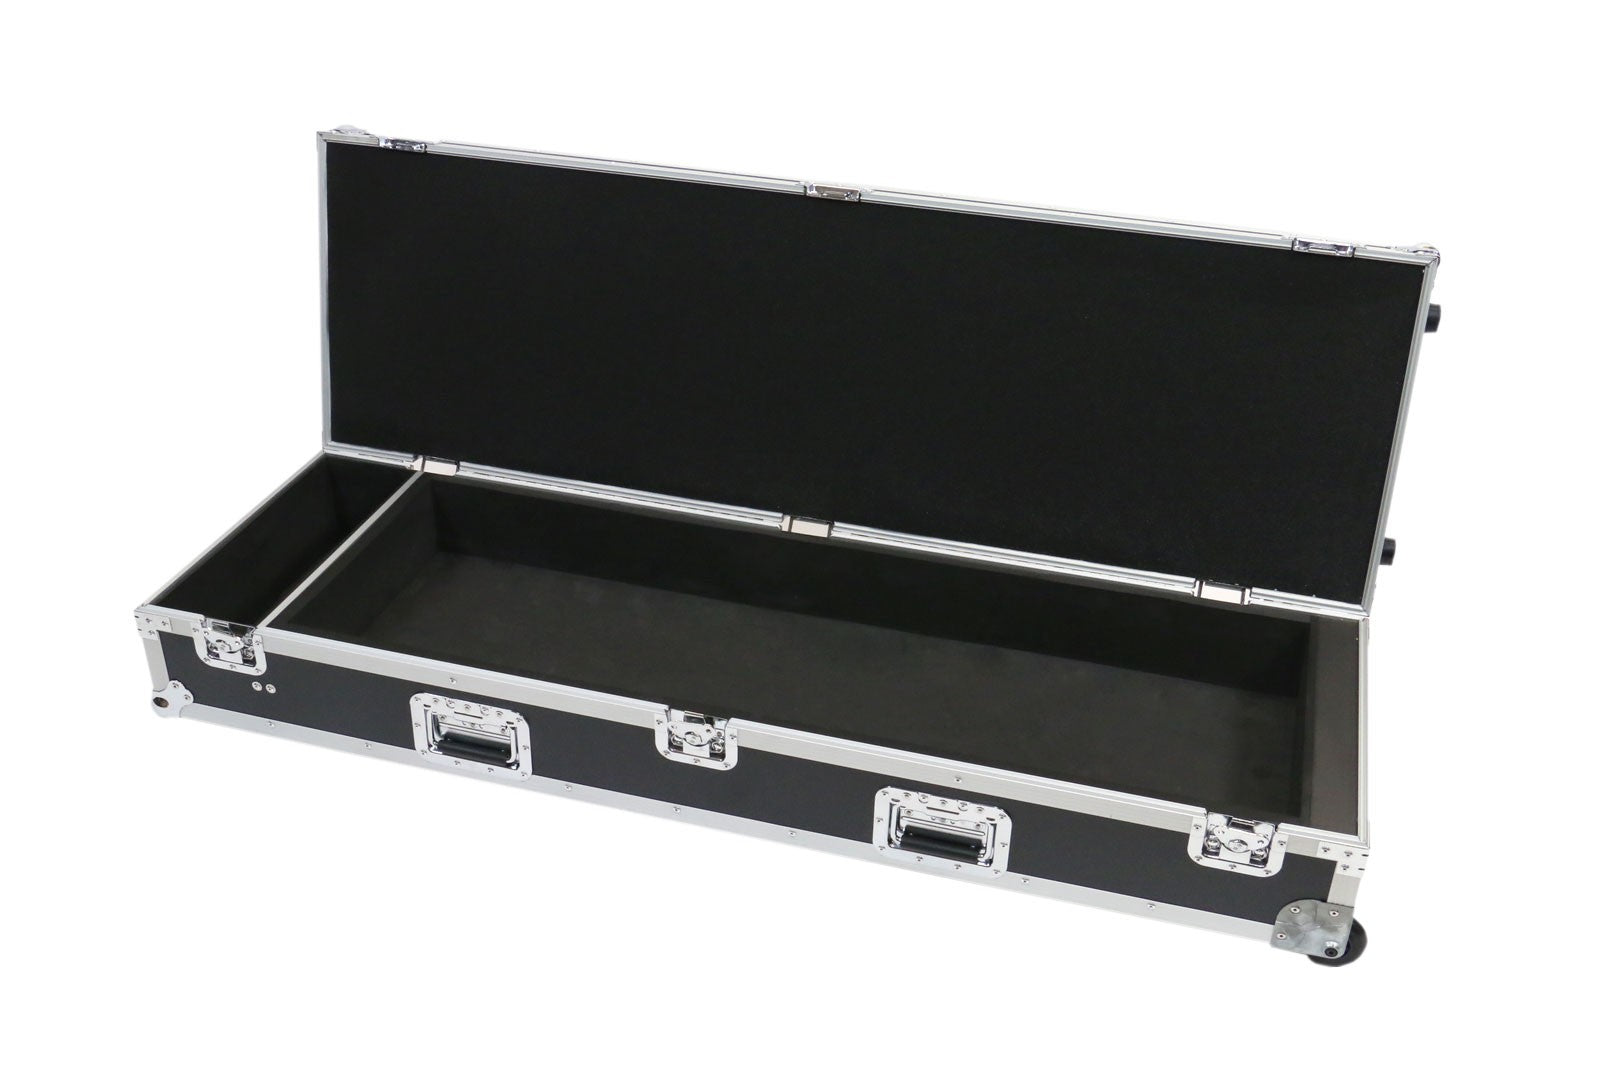 OSP ATA-XF7-WC Case with Recessed Casters for Yamaha Motif XF7, ES7, or XS7